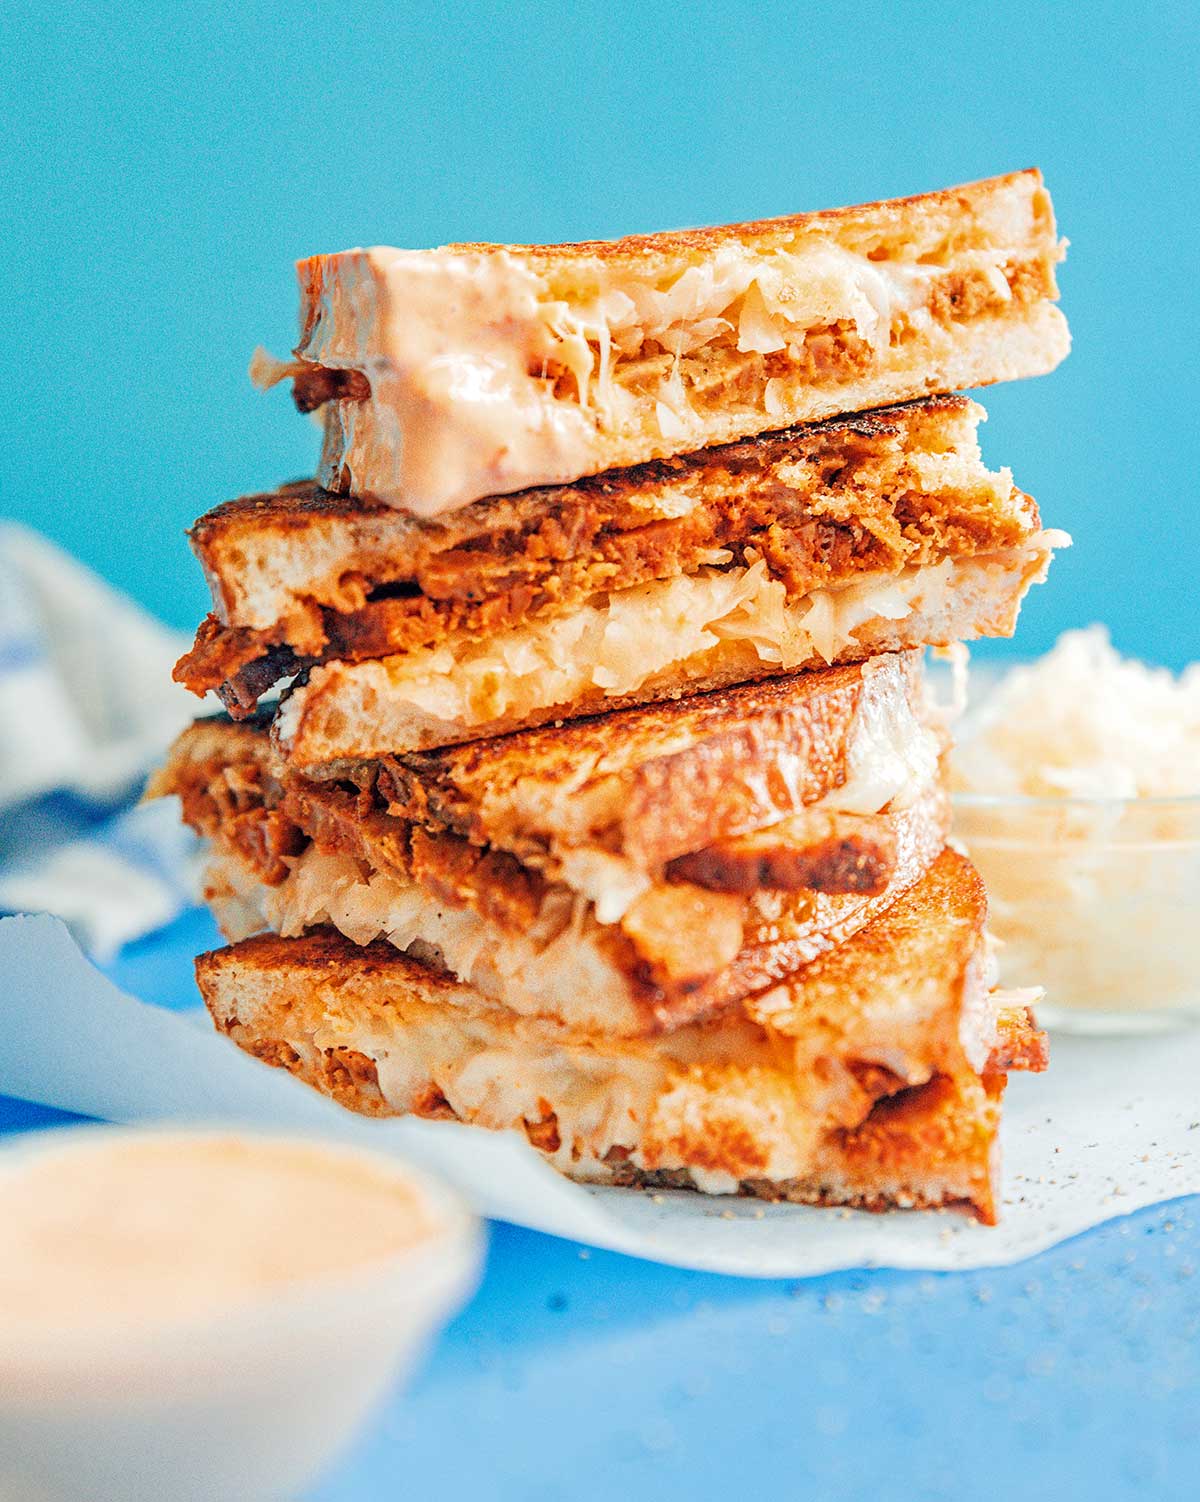 Four halves of a seitan reuben sandwich stacked on top of one another